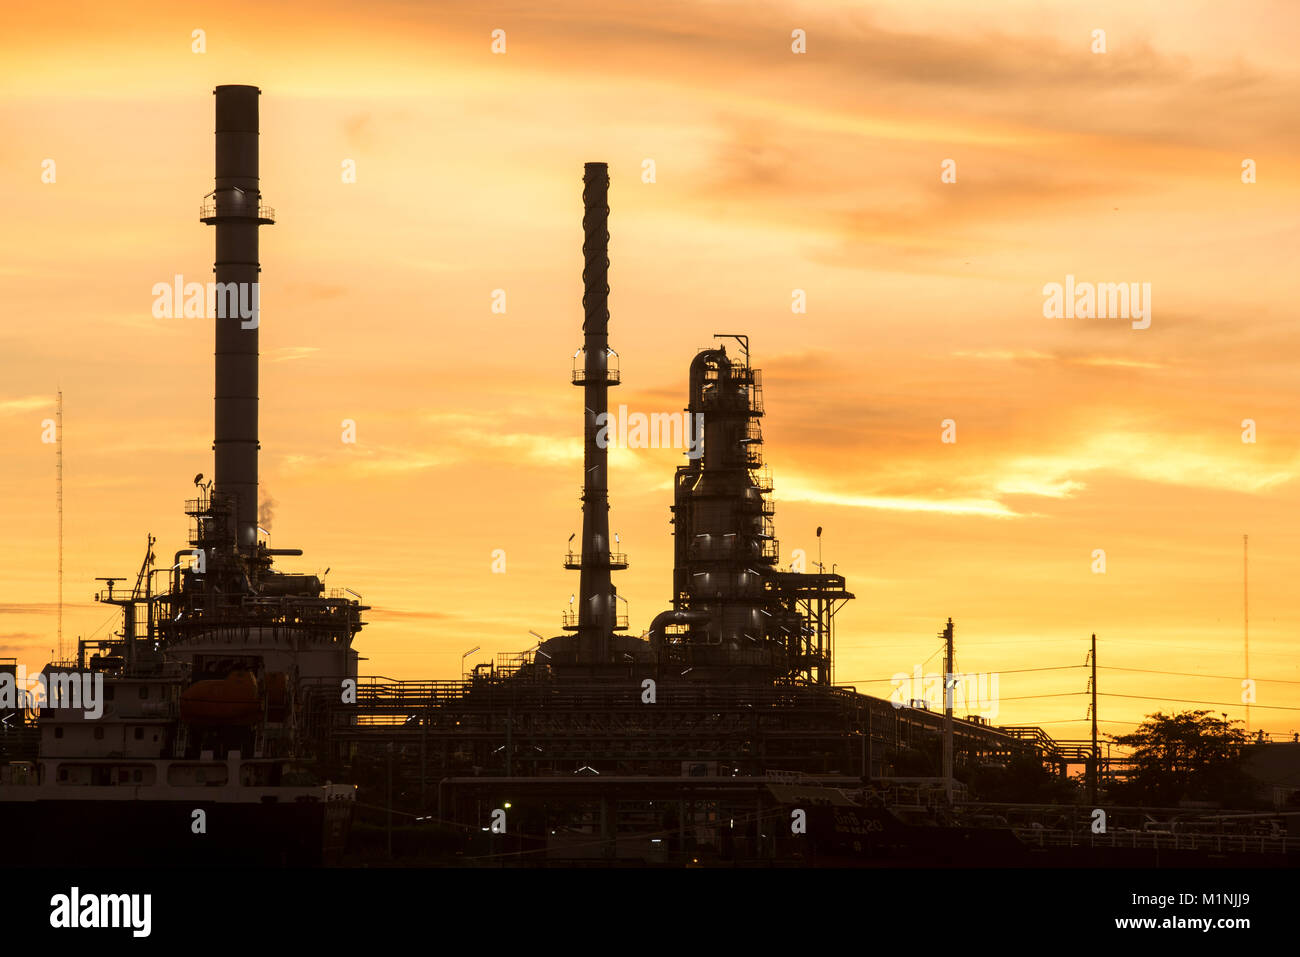 Oil and gas refinery industry Factory at sunset Stock Photo